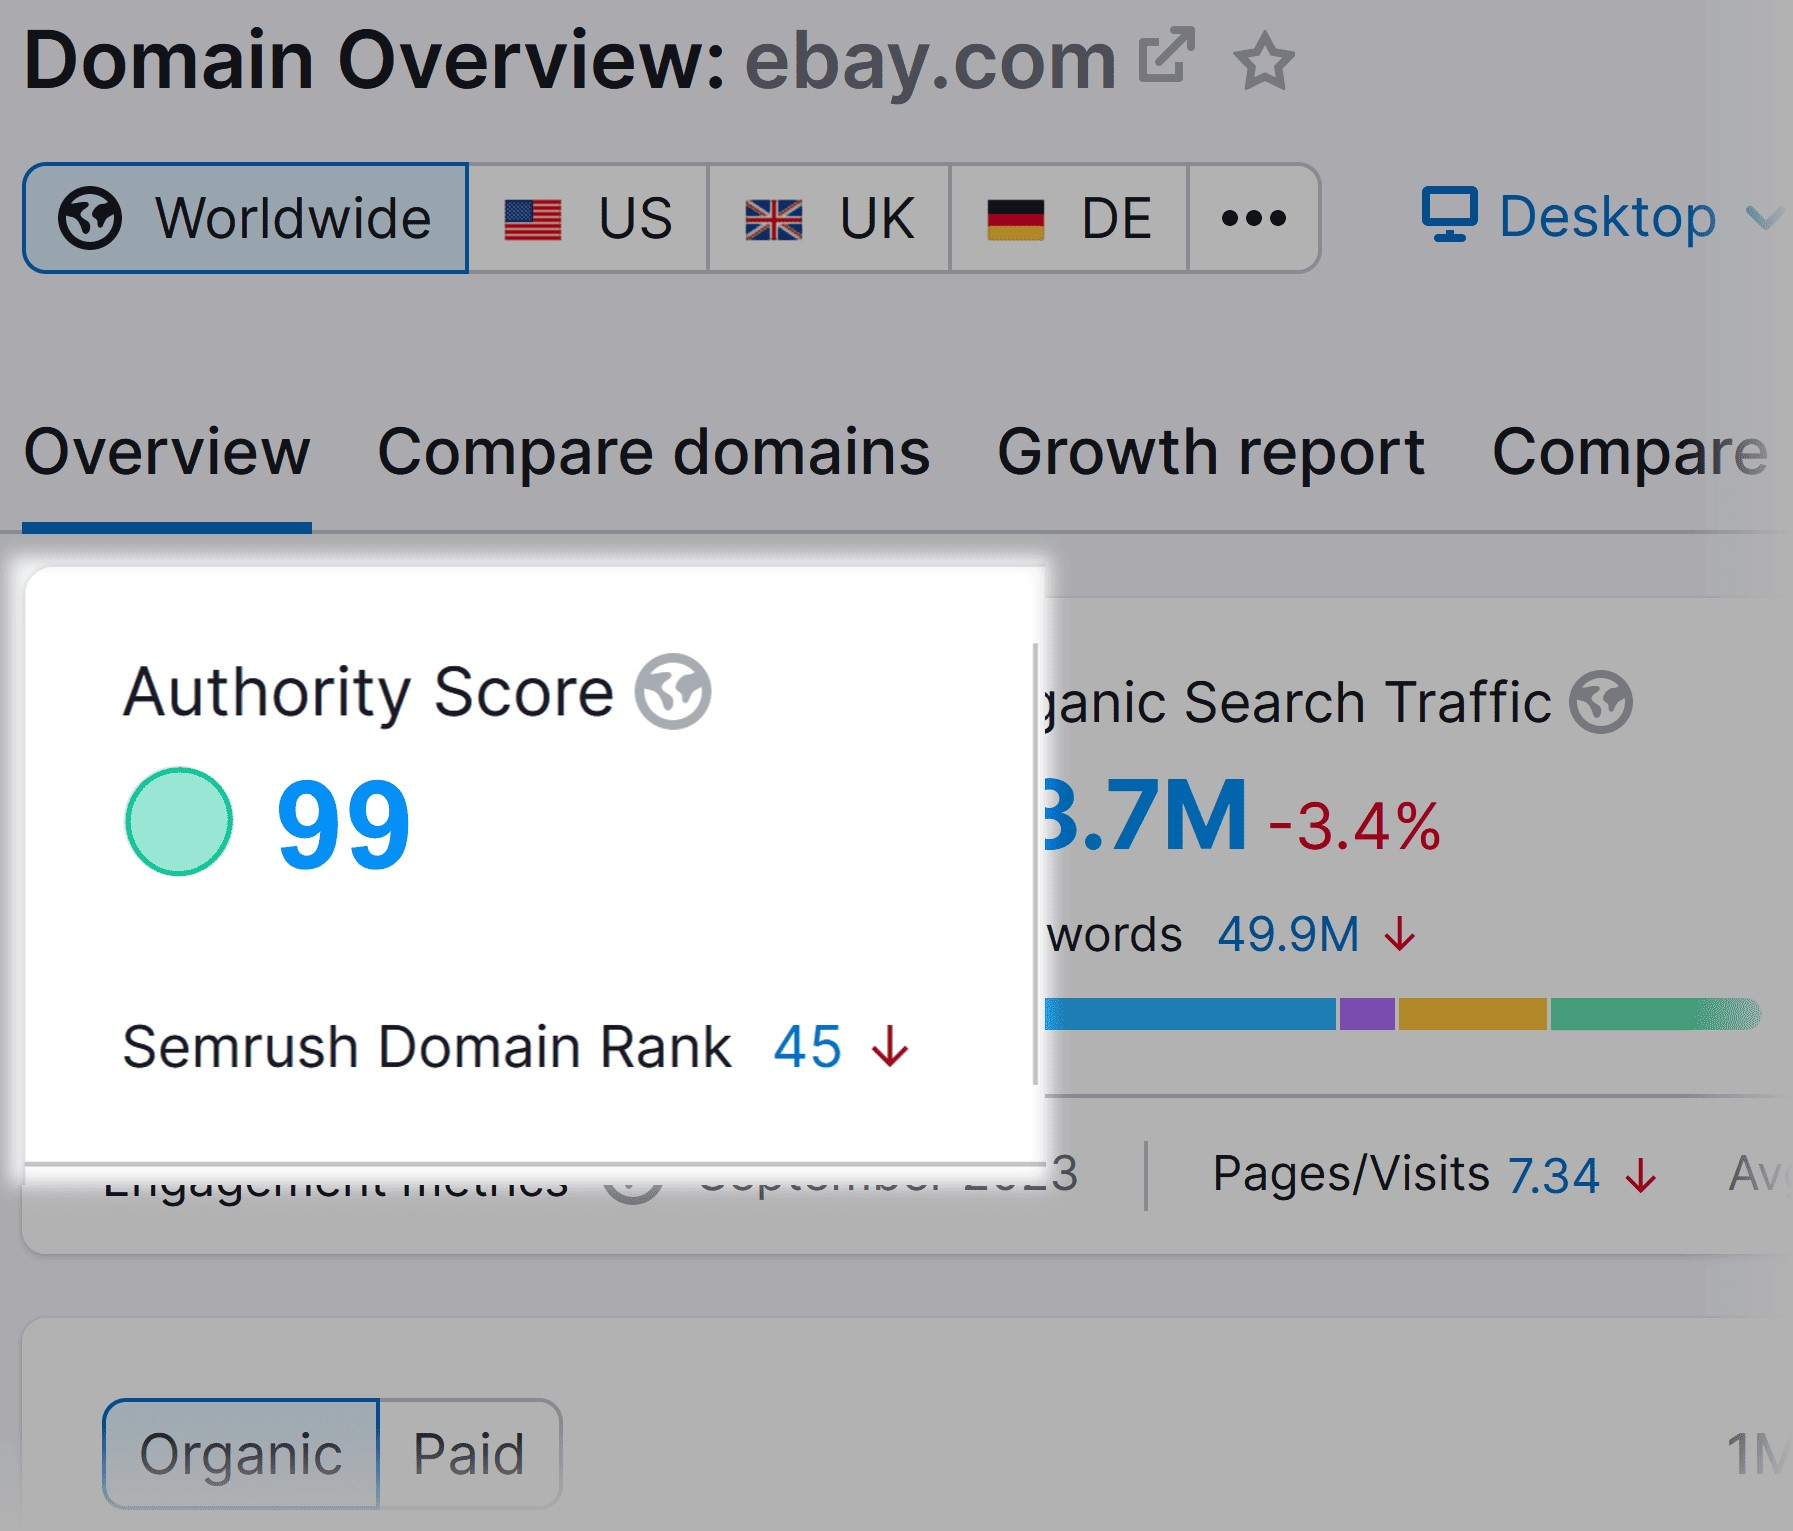 eBay's authority score (99) highlighted in Domain Overview tool